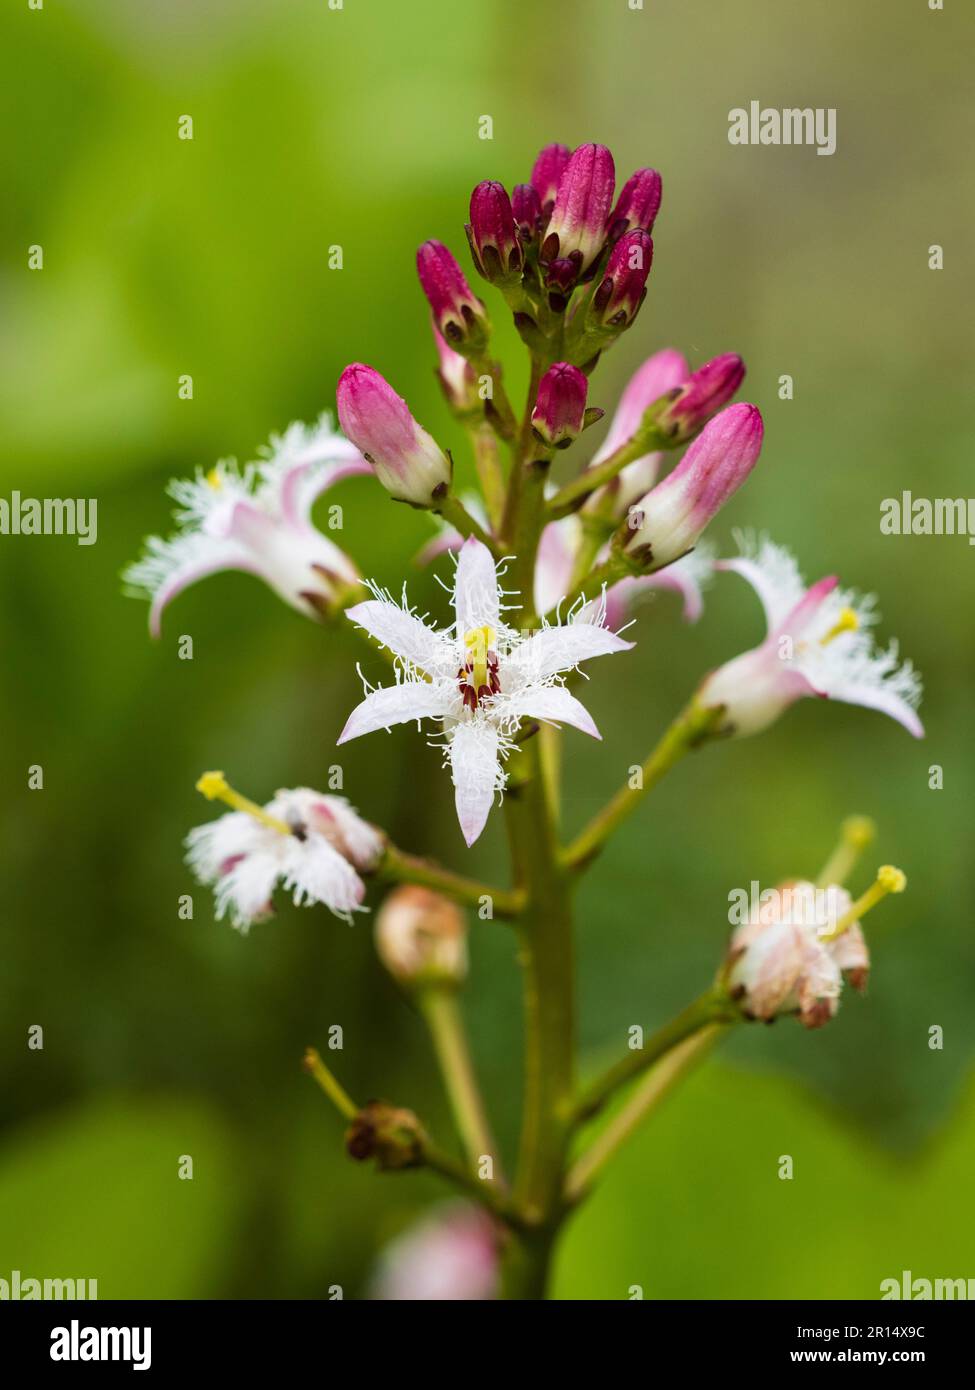 Hairy star like flowers of the marginal aquatic pond plant, Menyanthes trifoliata, the bog bean Stock Photo